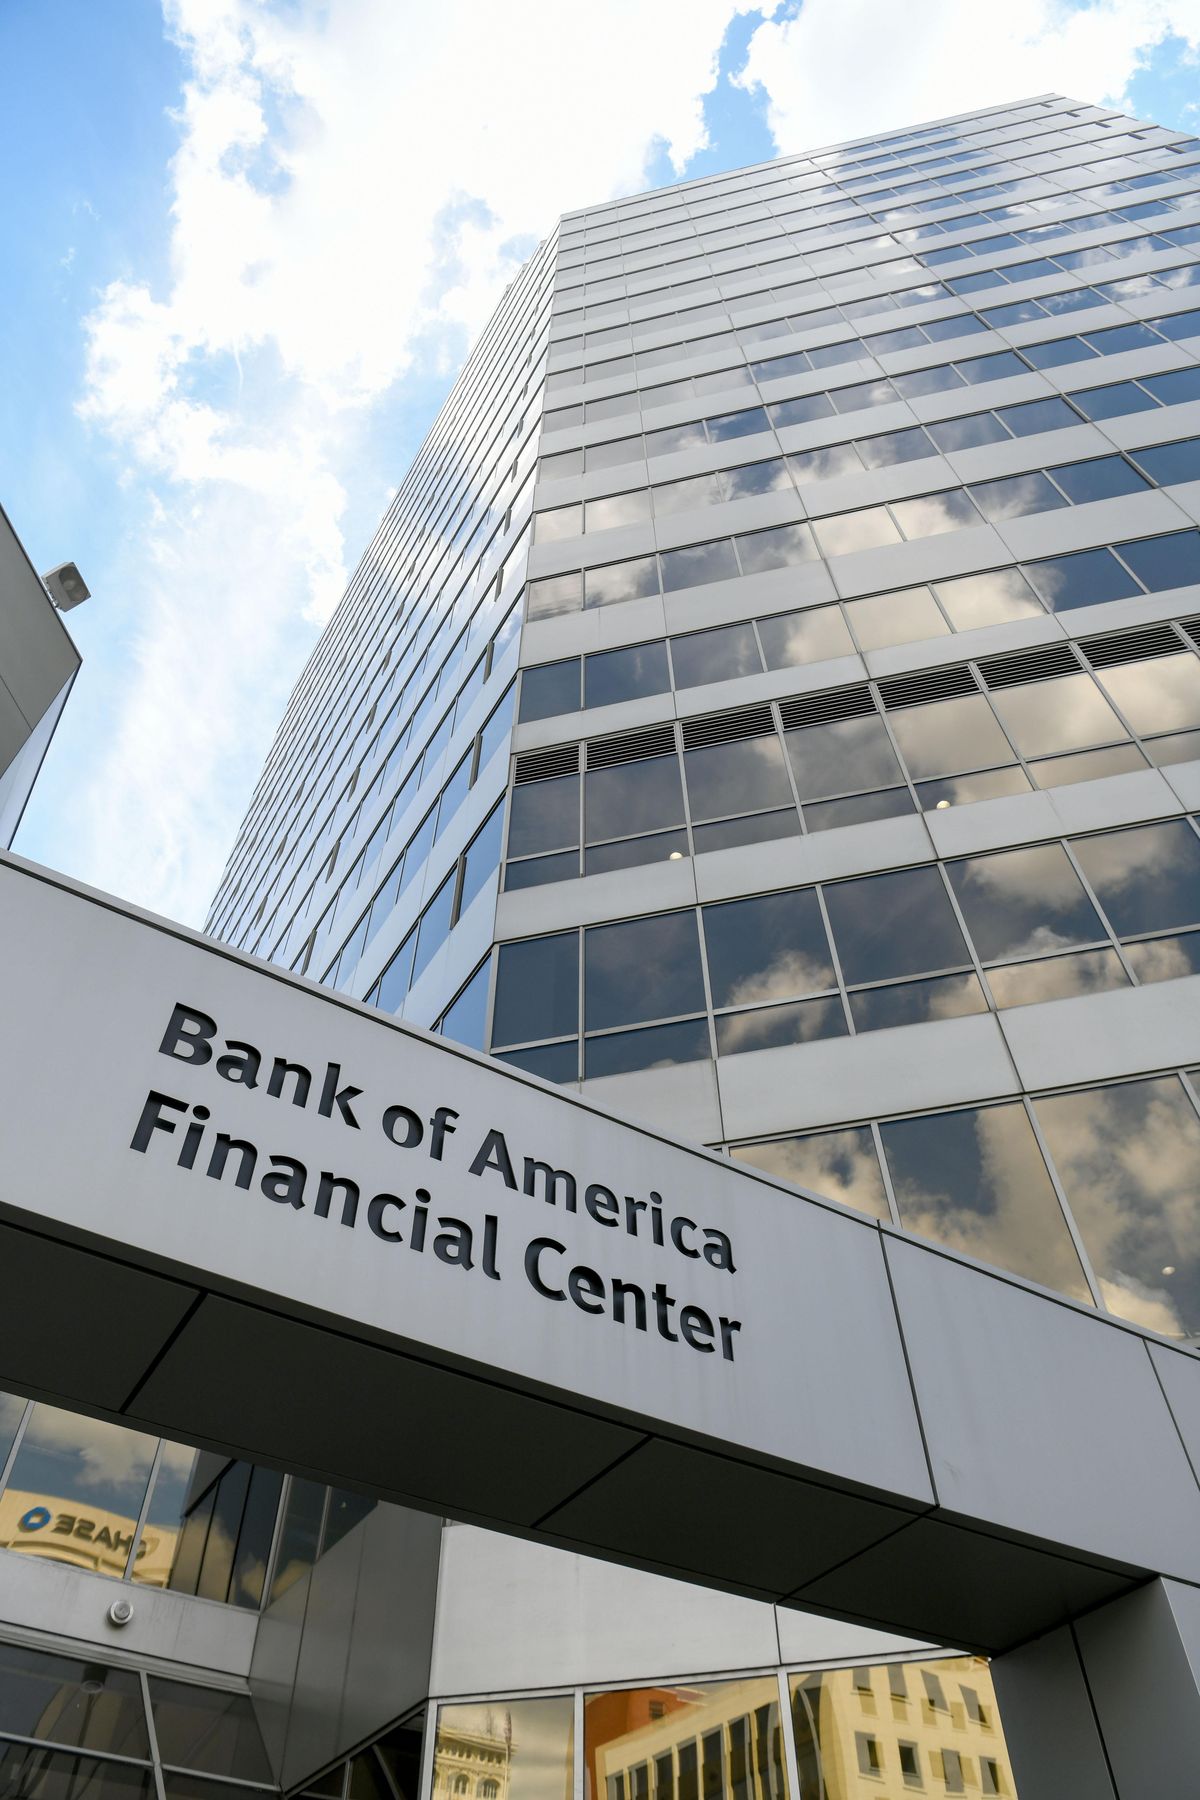 The Bank of America Financial Center in Spokane is going up for sale. Shown Wednesday, May 23, 2018. (Jesse Tinsley / The Spokesman-Review)